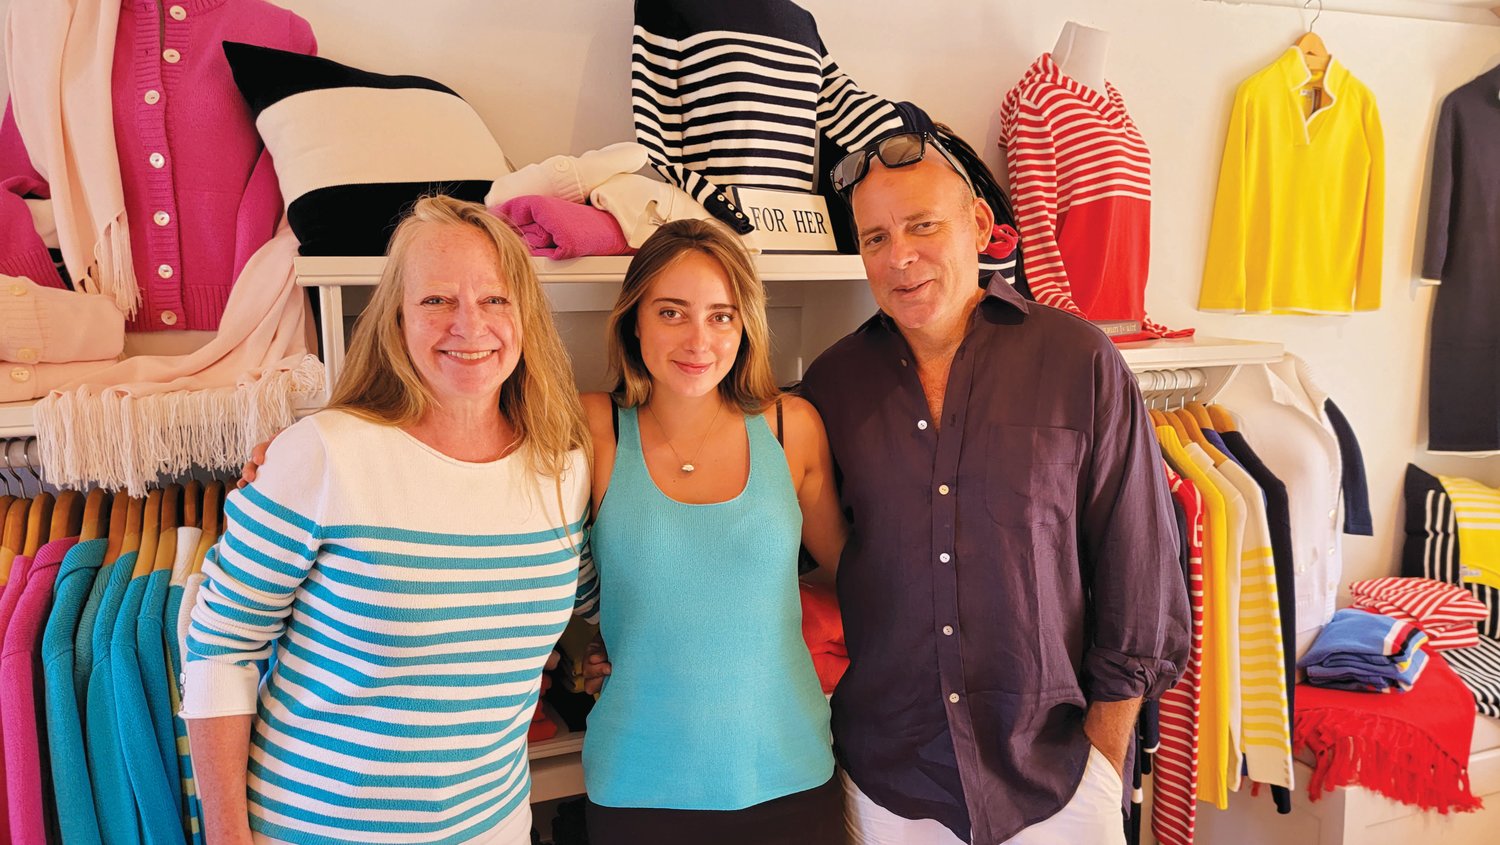 Amy, Ella and Peter England in the Peter England Nantucket clothing store at 3 Old South Wharf.